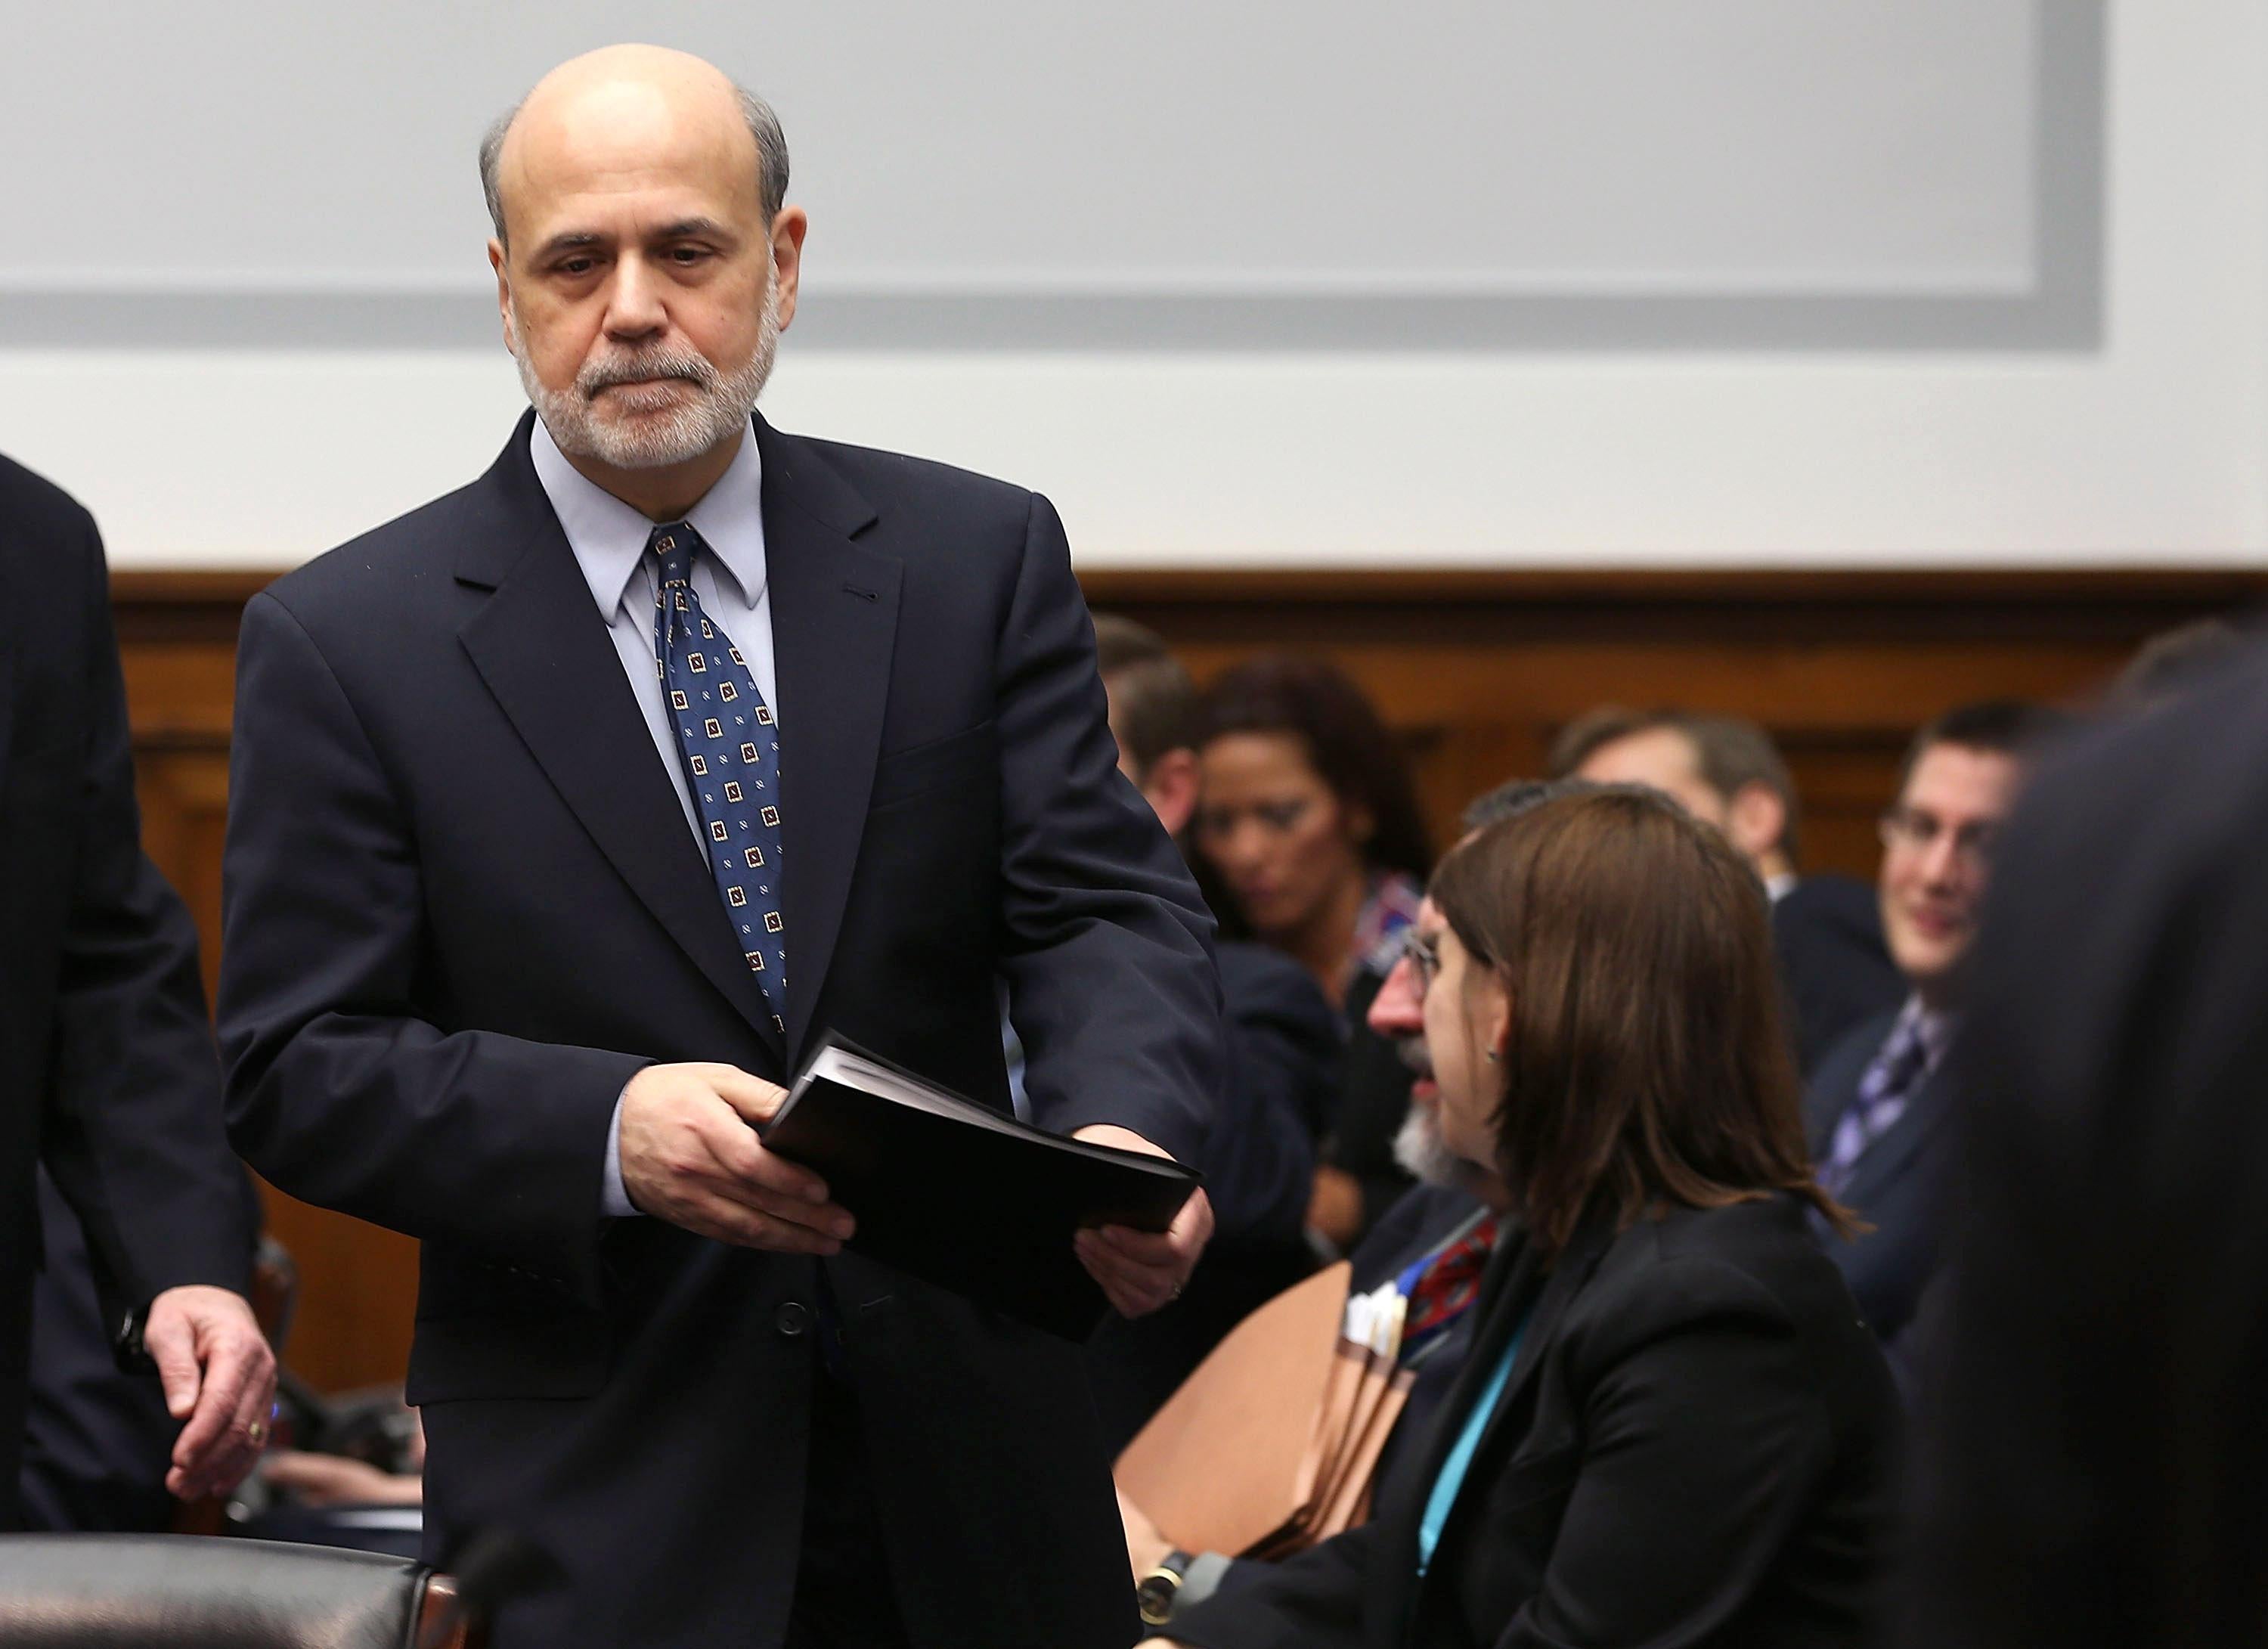 Federal Reserve Board Chairman Ben Bernanke arrives at a House Financial Services Committee hearing on Capitol Hill, Feb. 27, 2013.